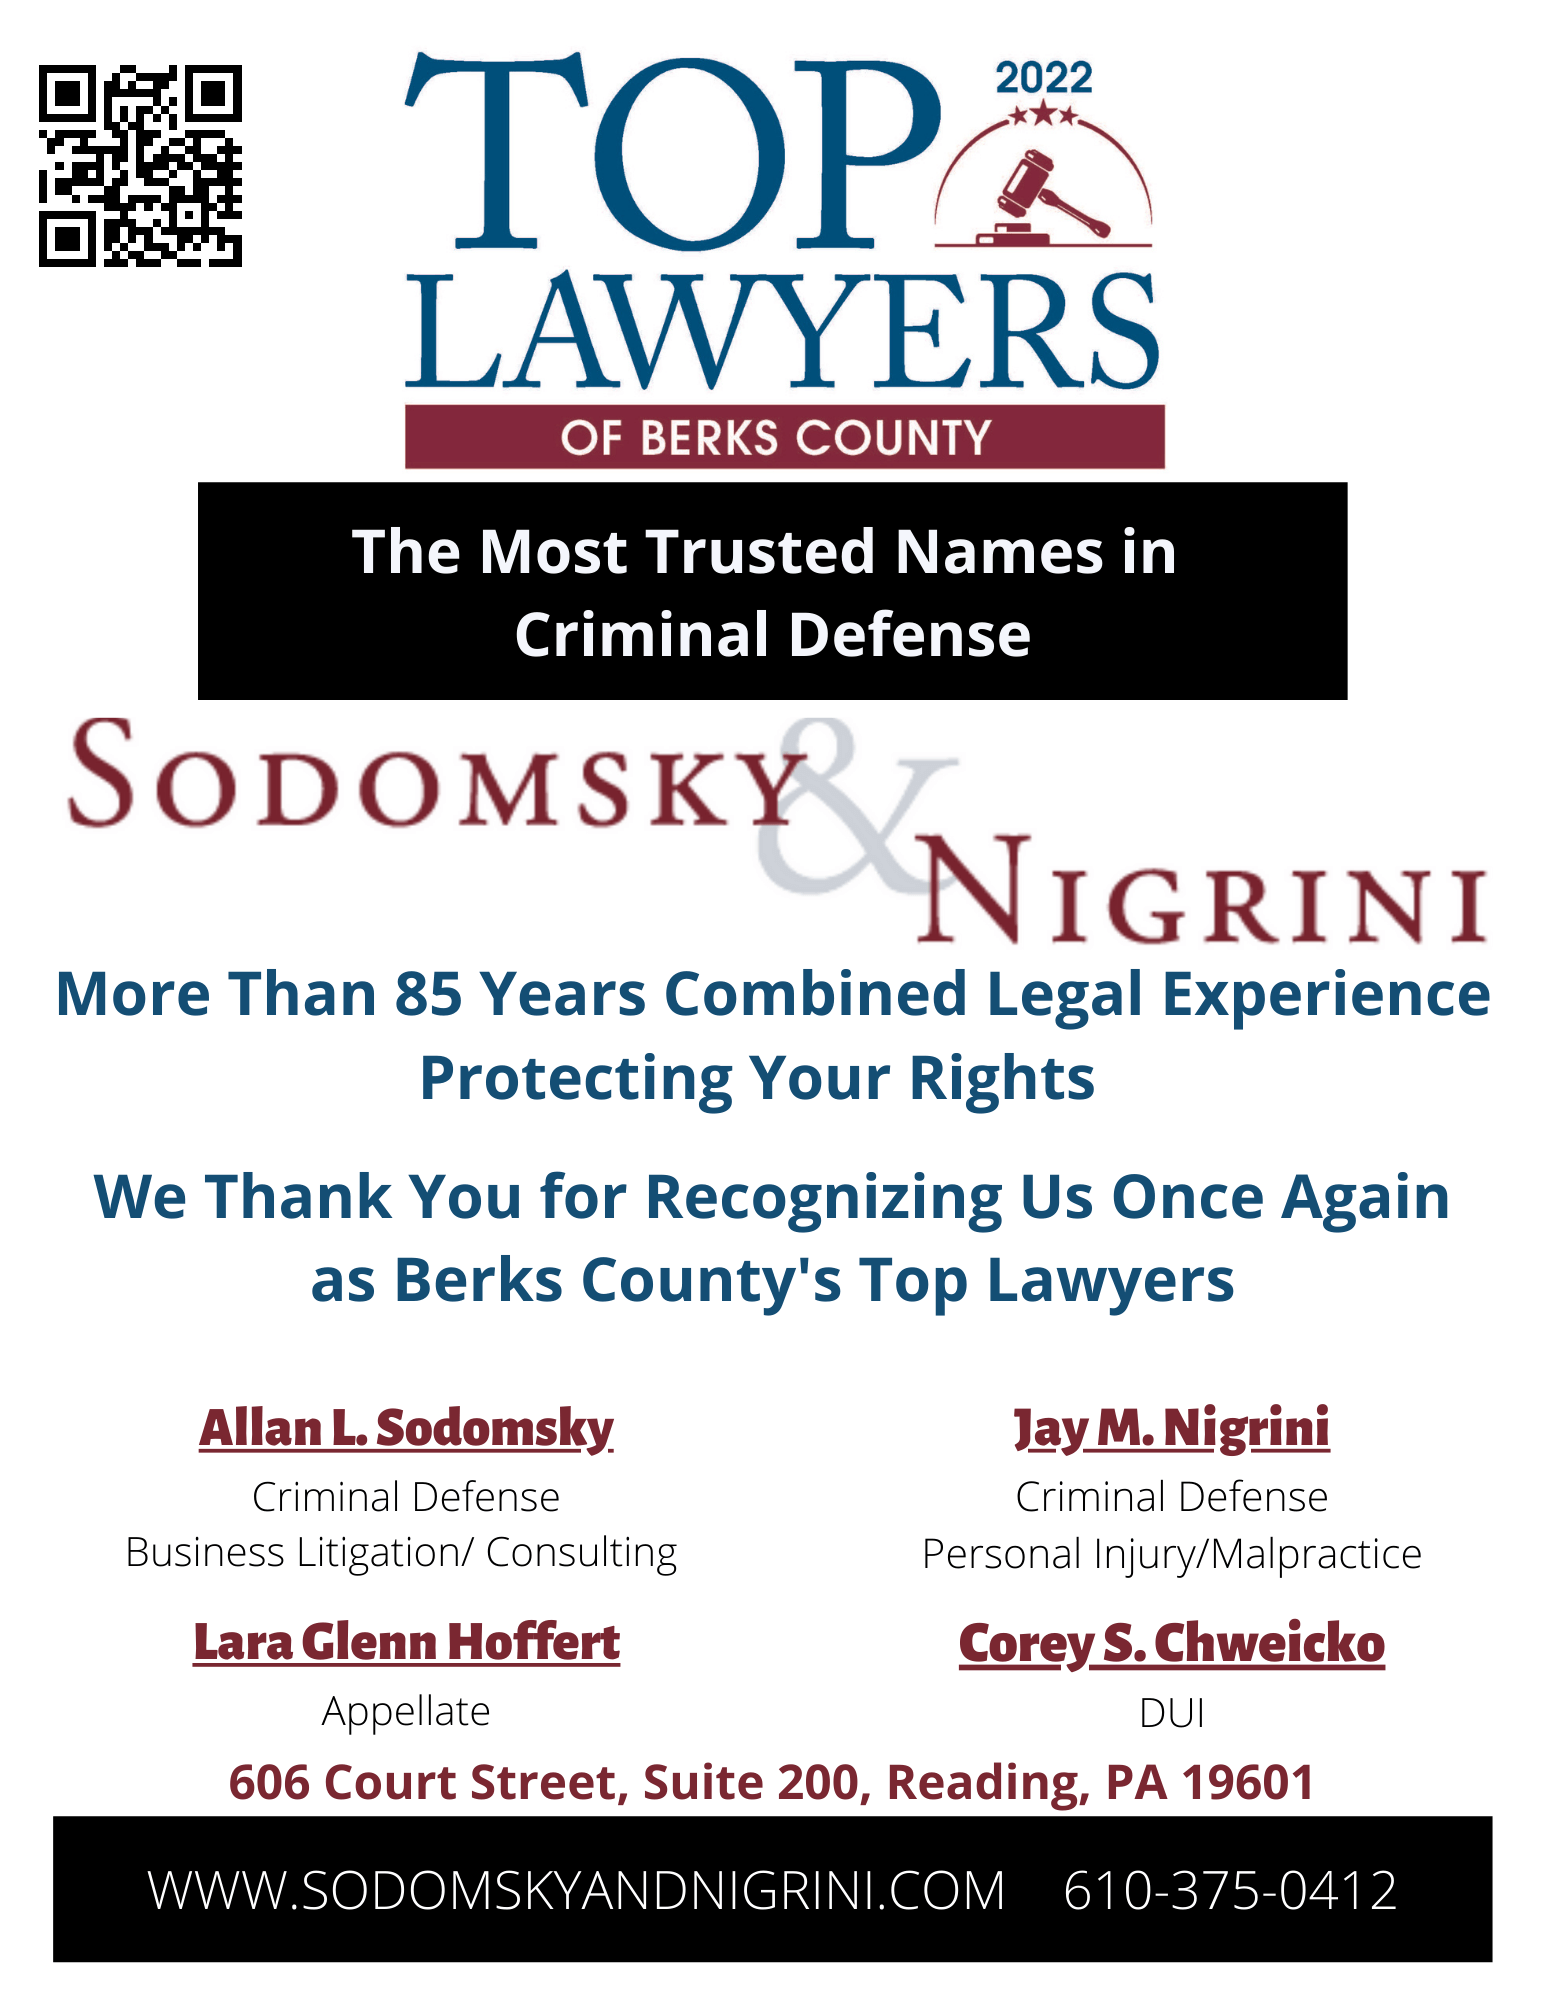 Top Lawyers of Berks County - The Most Trusted Names in Criminal Defense